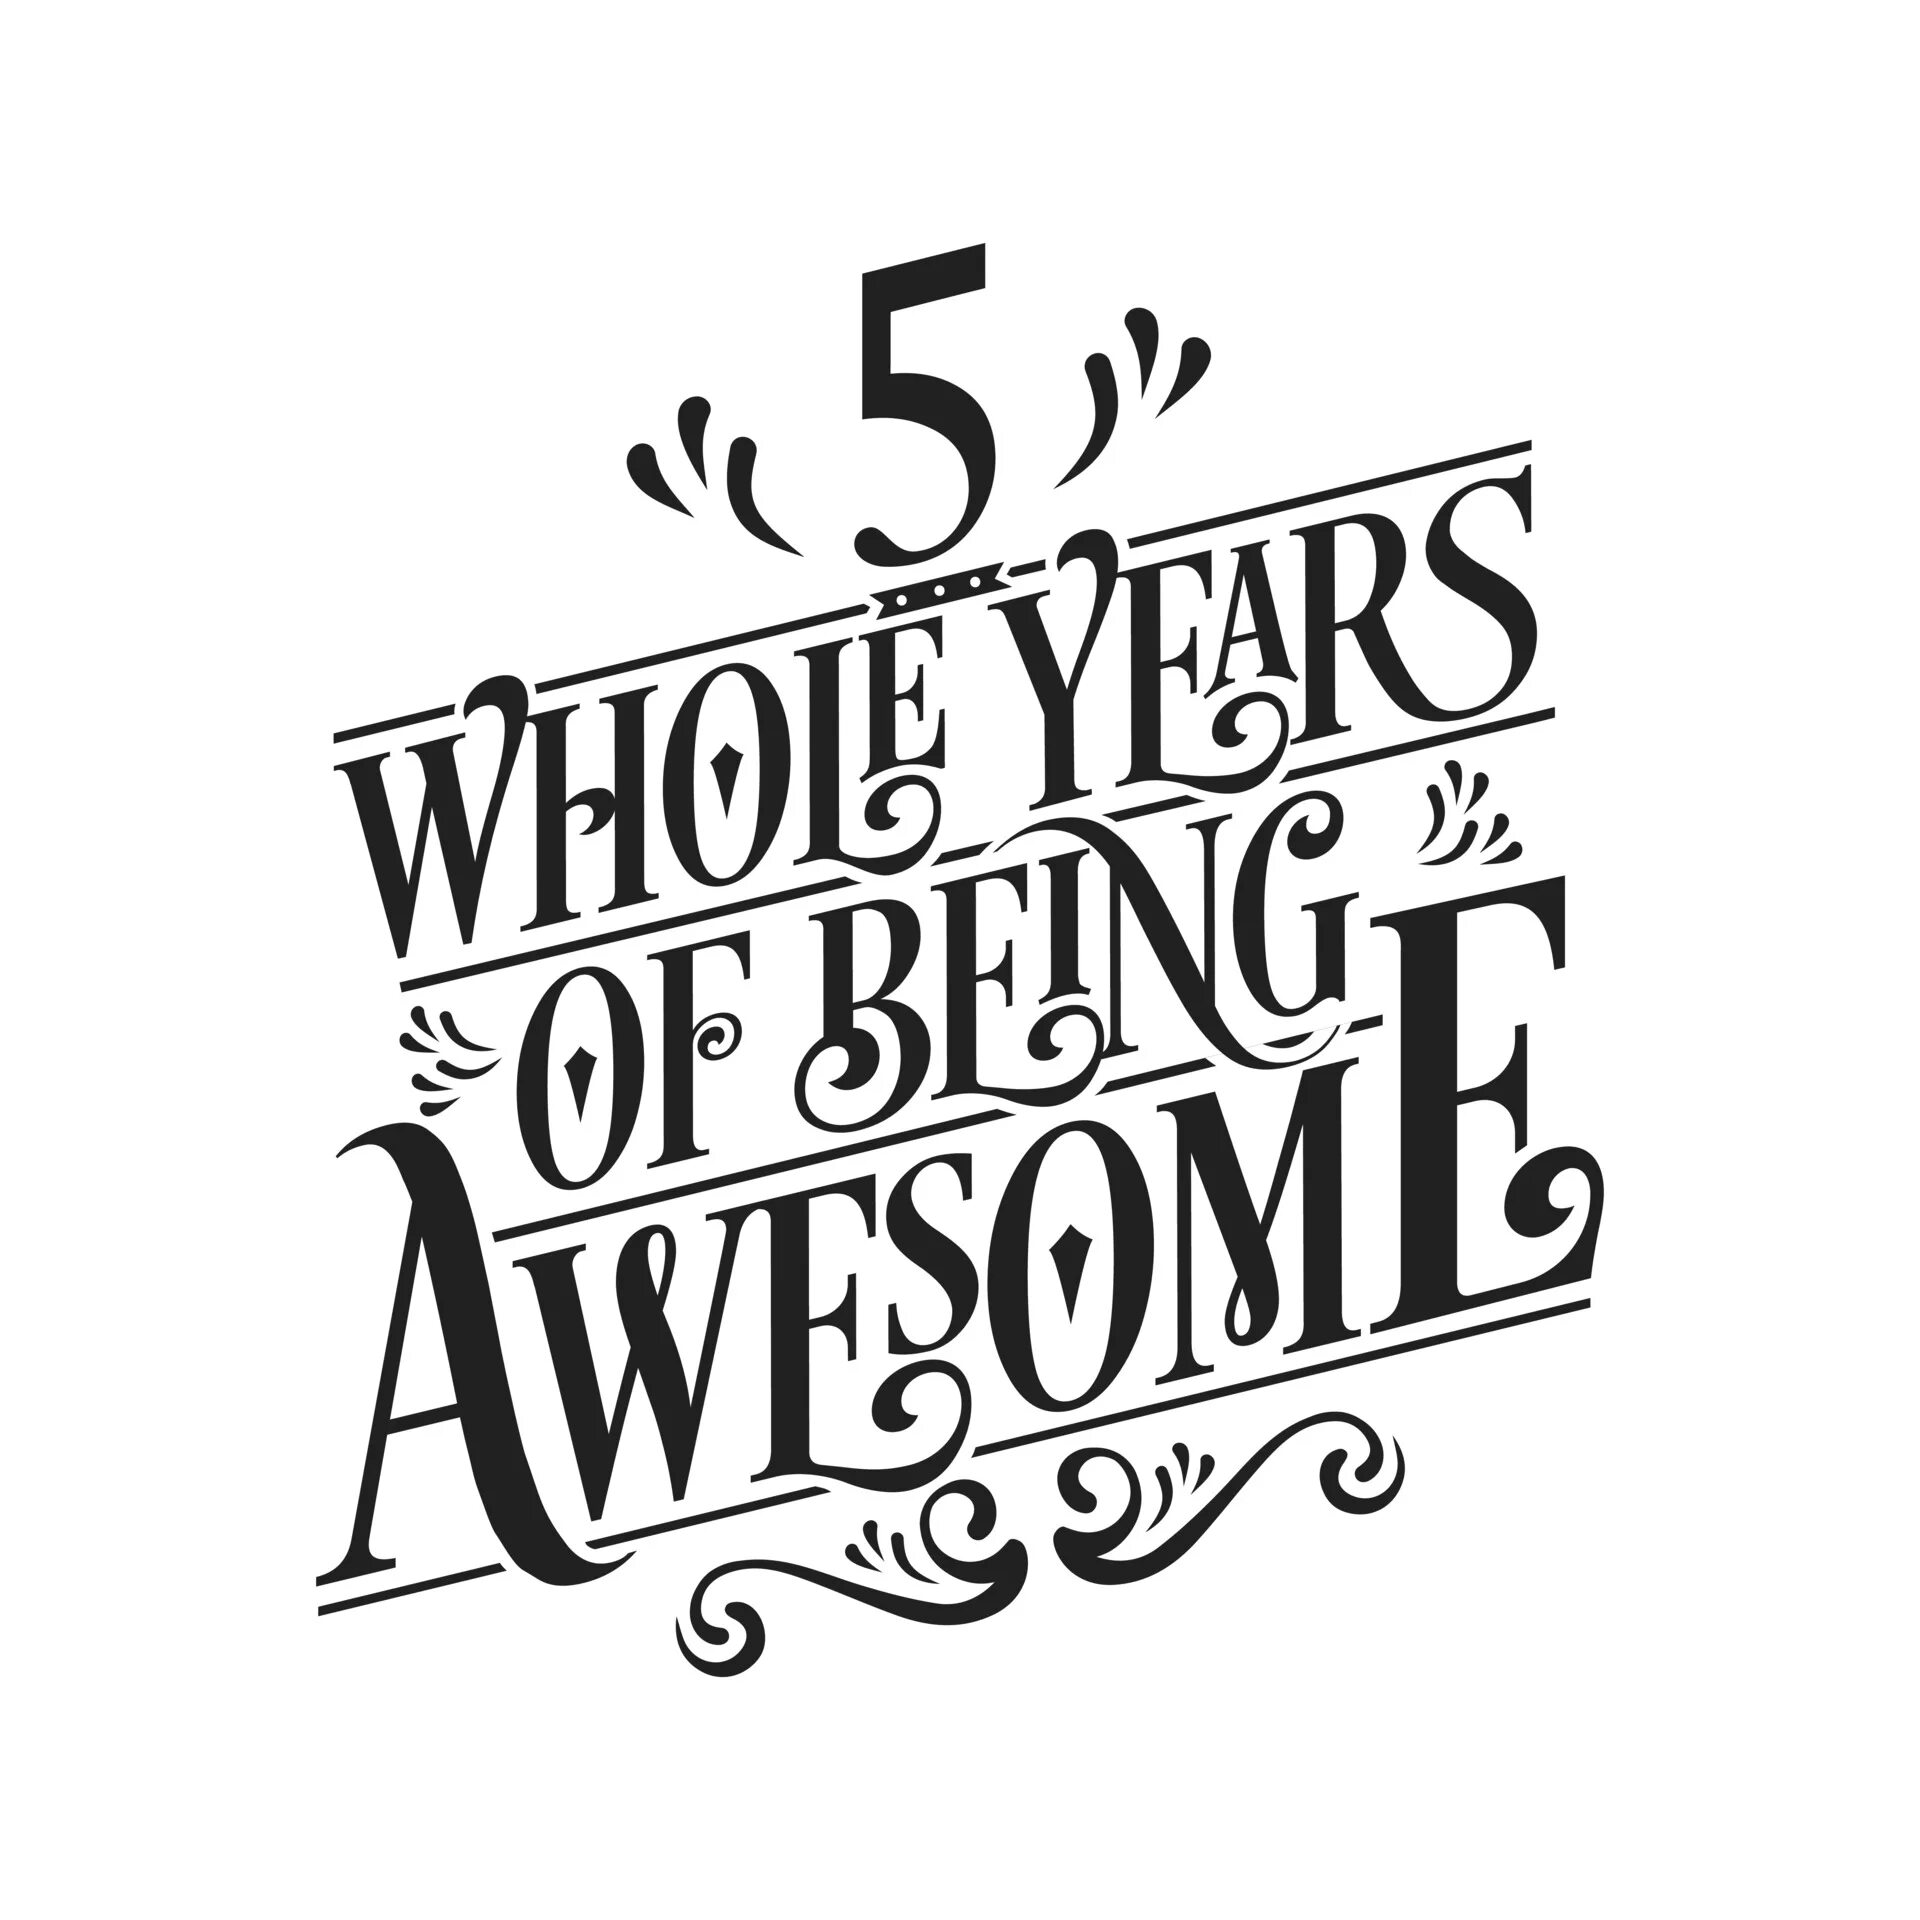 40 years of being. 50 Years of being Awesome вектор. 50 Лет юбилей вектор. 40 Years of being Awesome. Anniversary typographic.